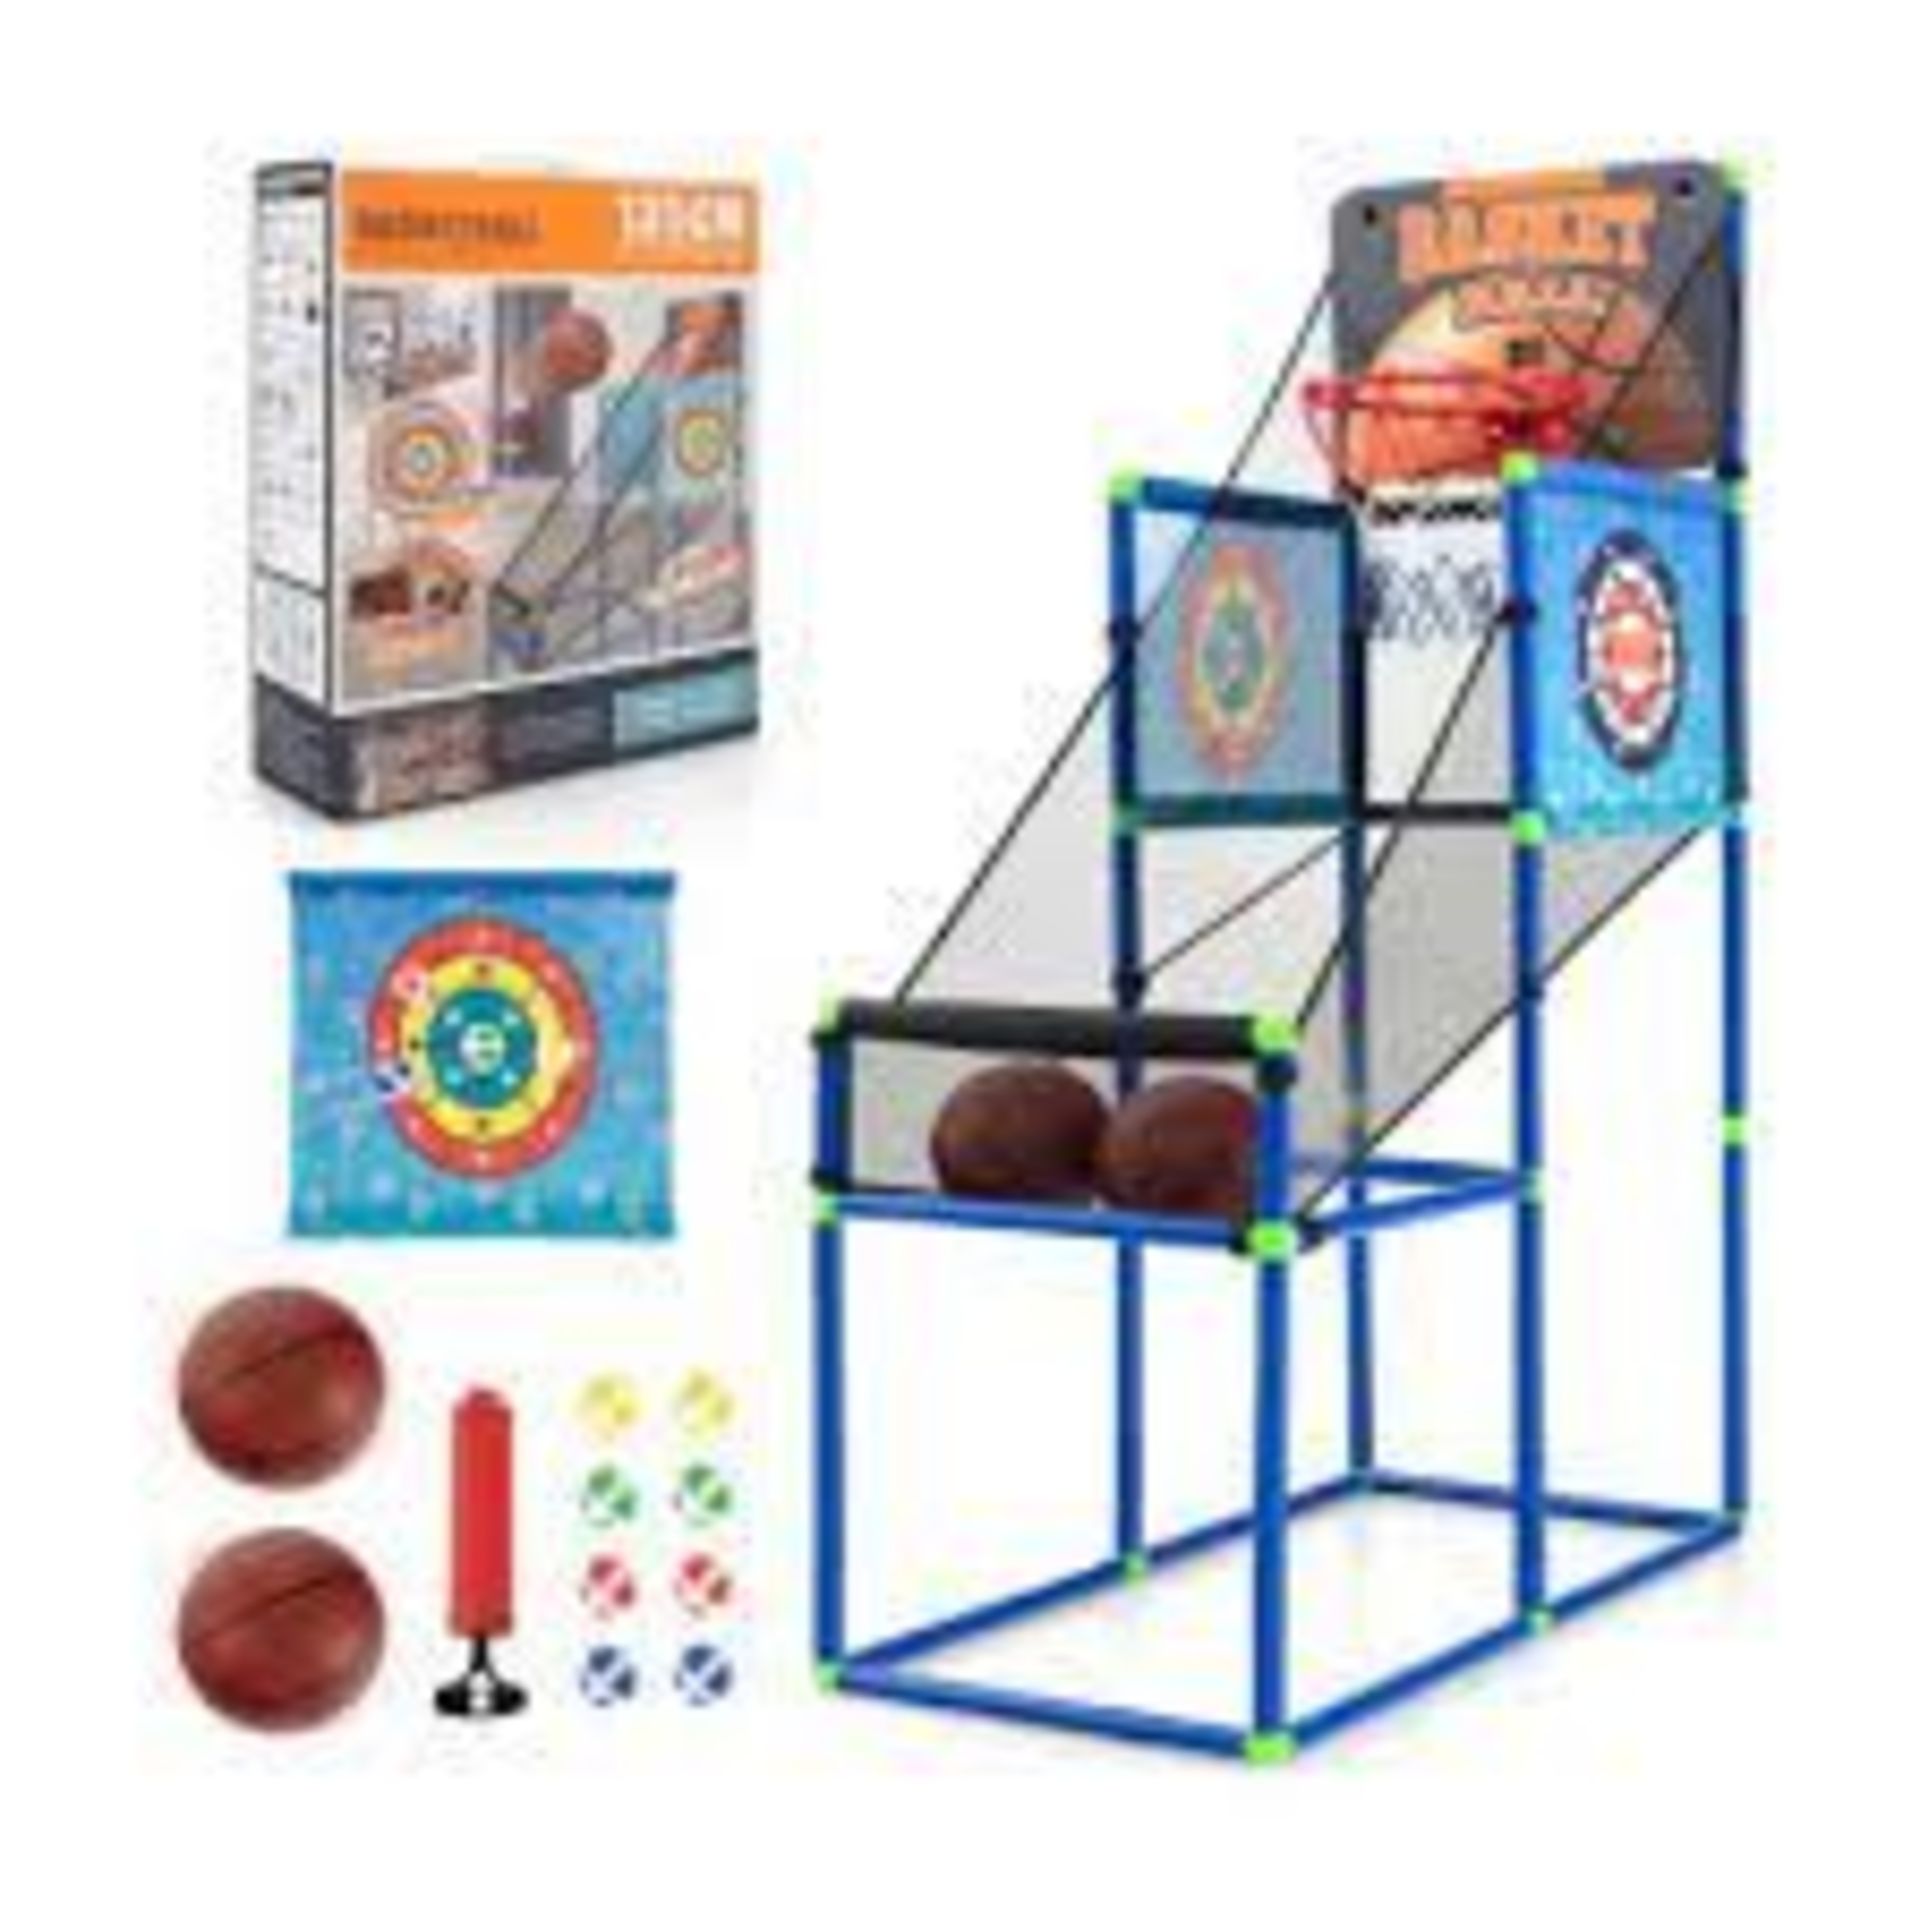 2-in-1 Kids Basketball Arcade Game with Electronic Scoreboard. - ER53. This 2-in-1 basketball arcade